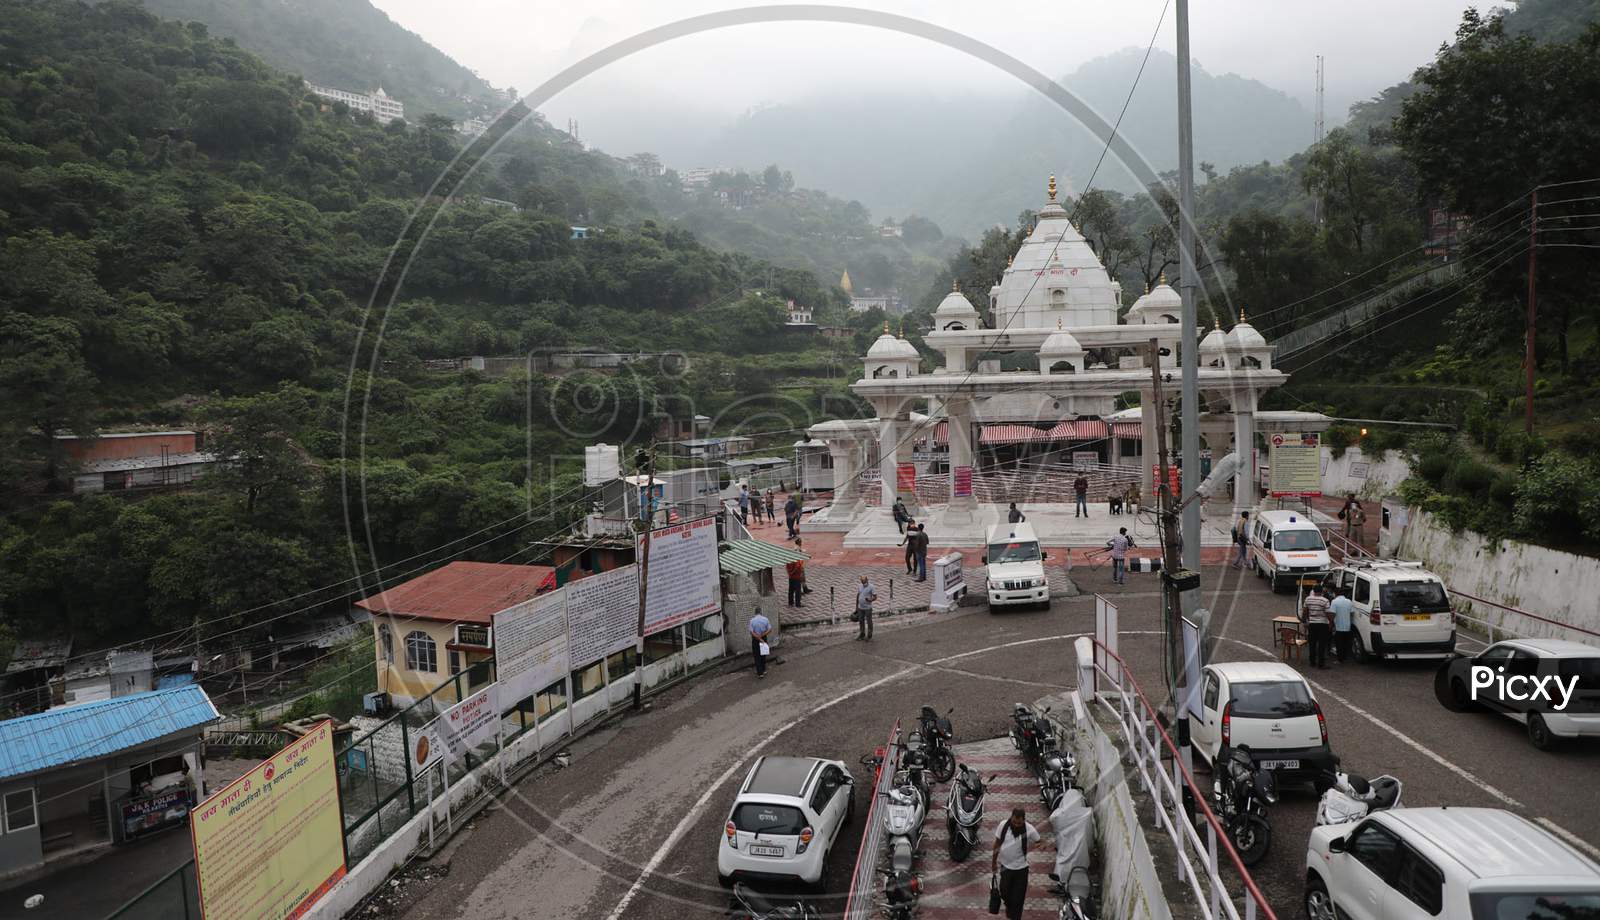 A view of Vaishno Devi Darshani deodi temple after authorities allowed re-opening of religious places in J&K, amid the ongoing COVID-19 pandemic, at Katra in Reasi district,on August 16 2020,